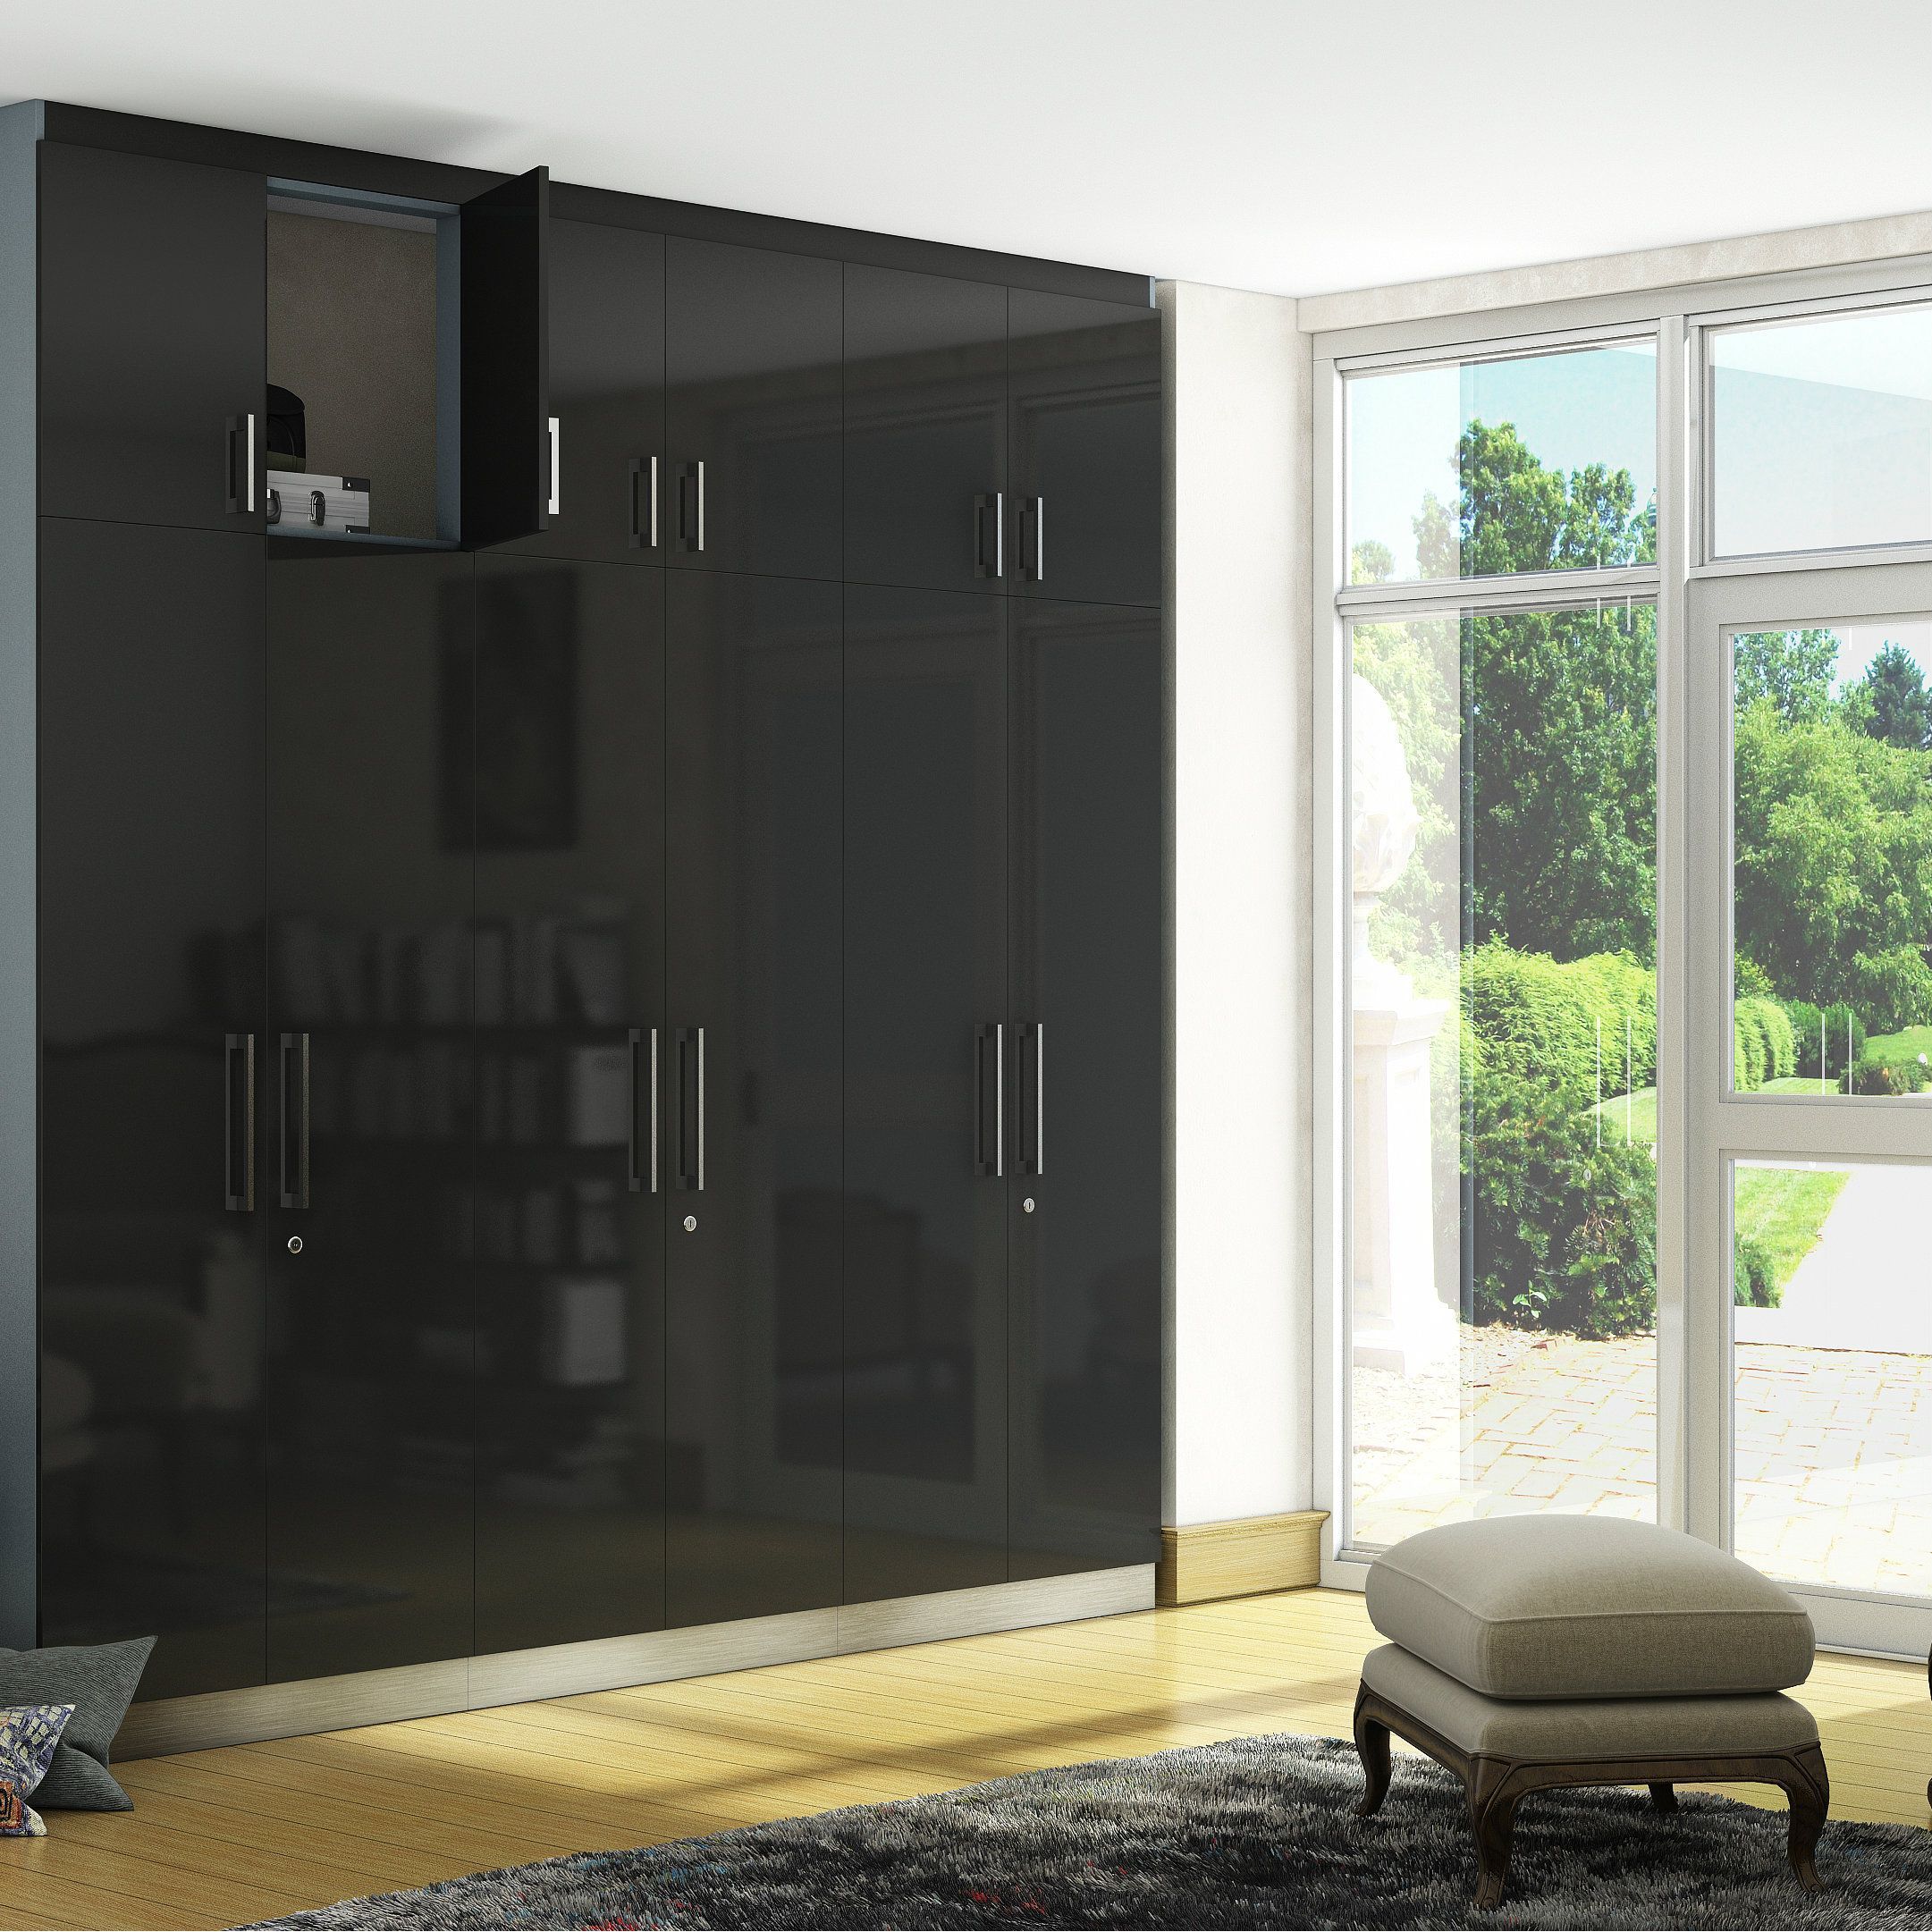 A Glossy Black Wardrobe That Is Every Bit As Impressive And Functional |  Wardrobe Design, Furniture Design, Grey Wardrobe Regarding Black Gloss Wardrobes (View 3 of 15)